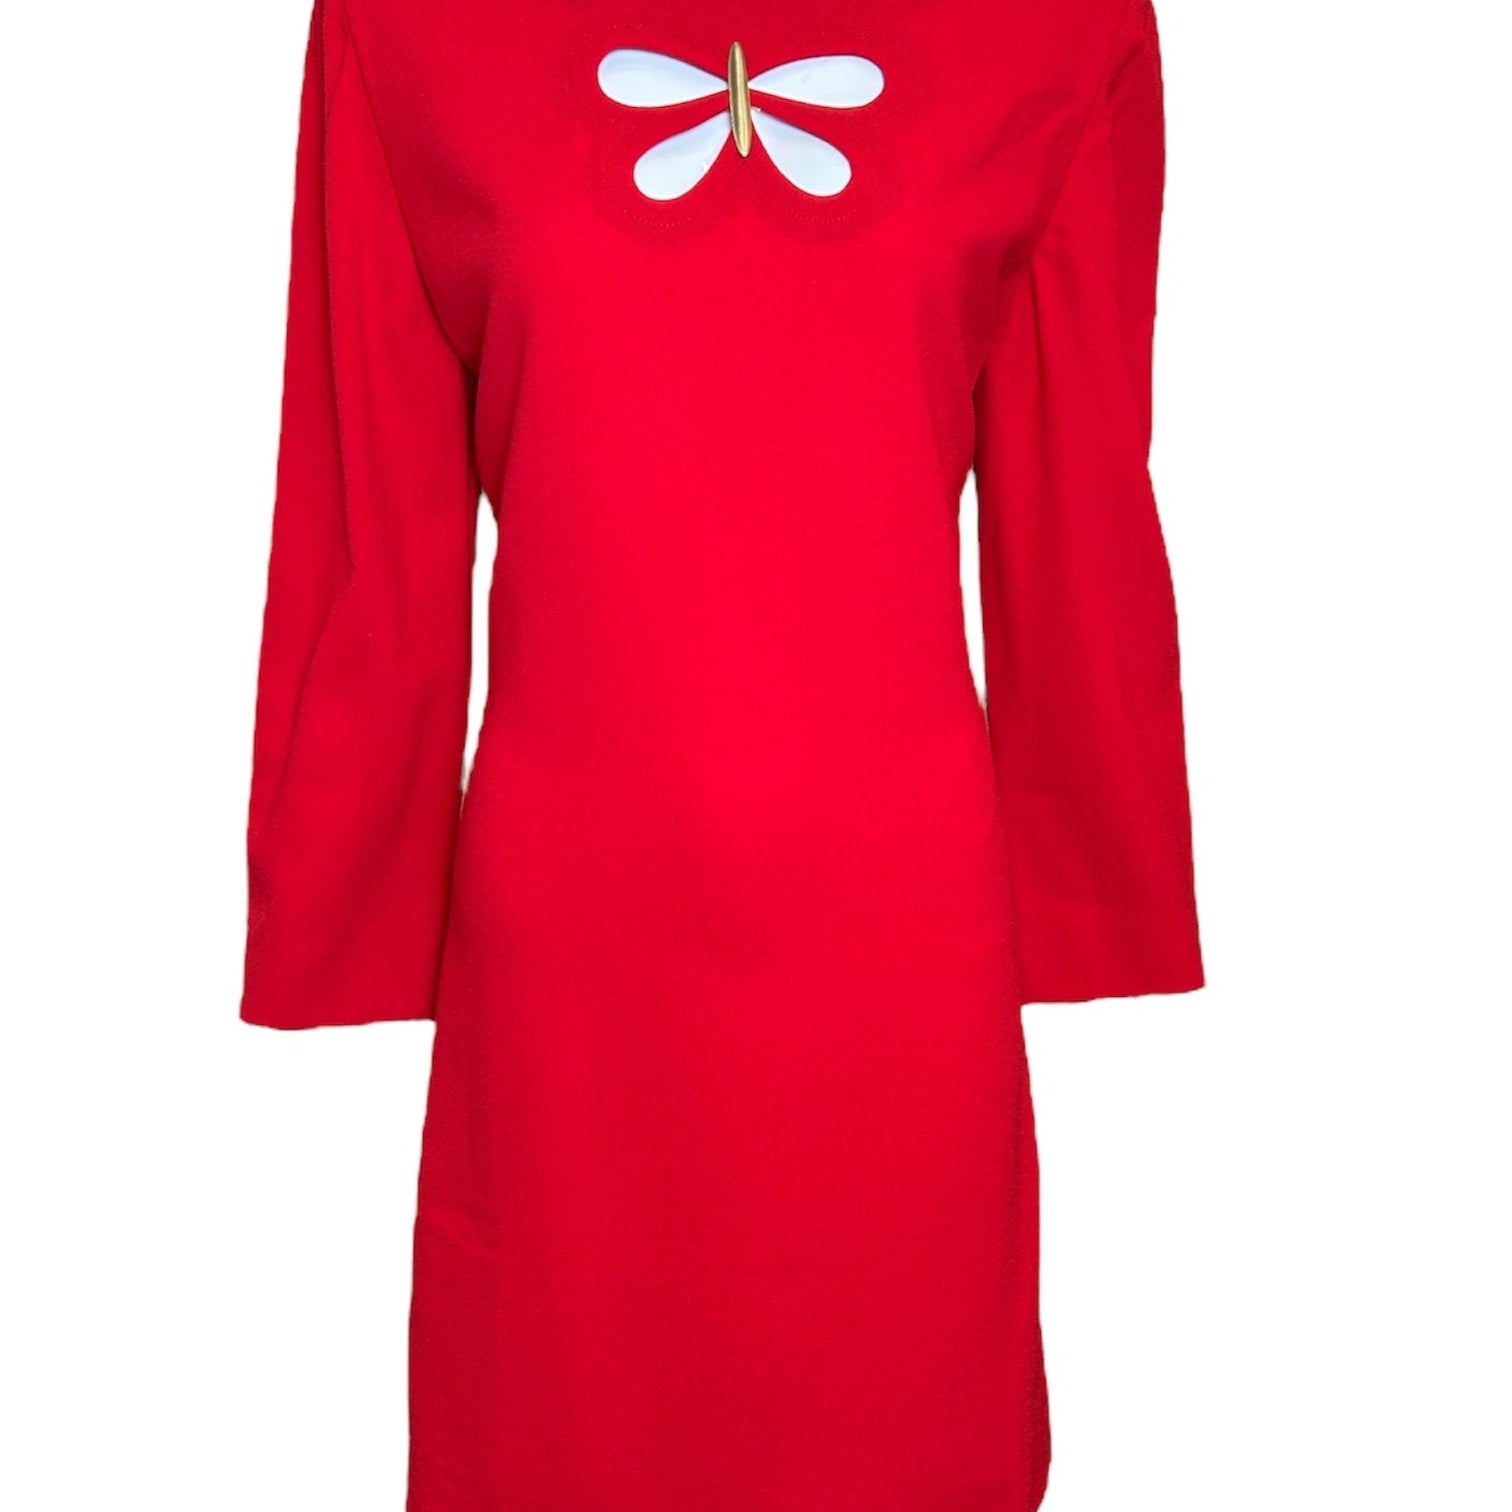 Pierre Cardin Red Mod Butterly Shift Dress FRONT PHOTO 1 OF 5